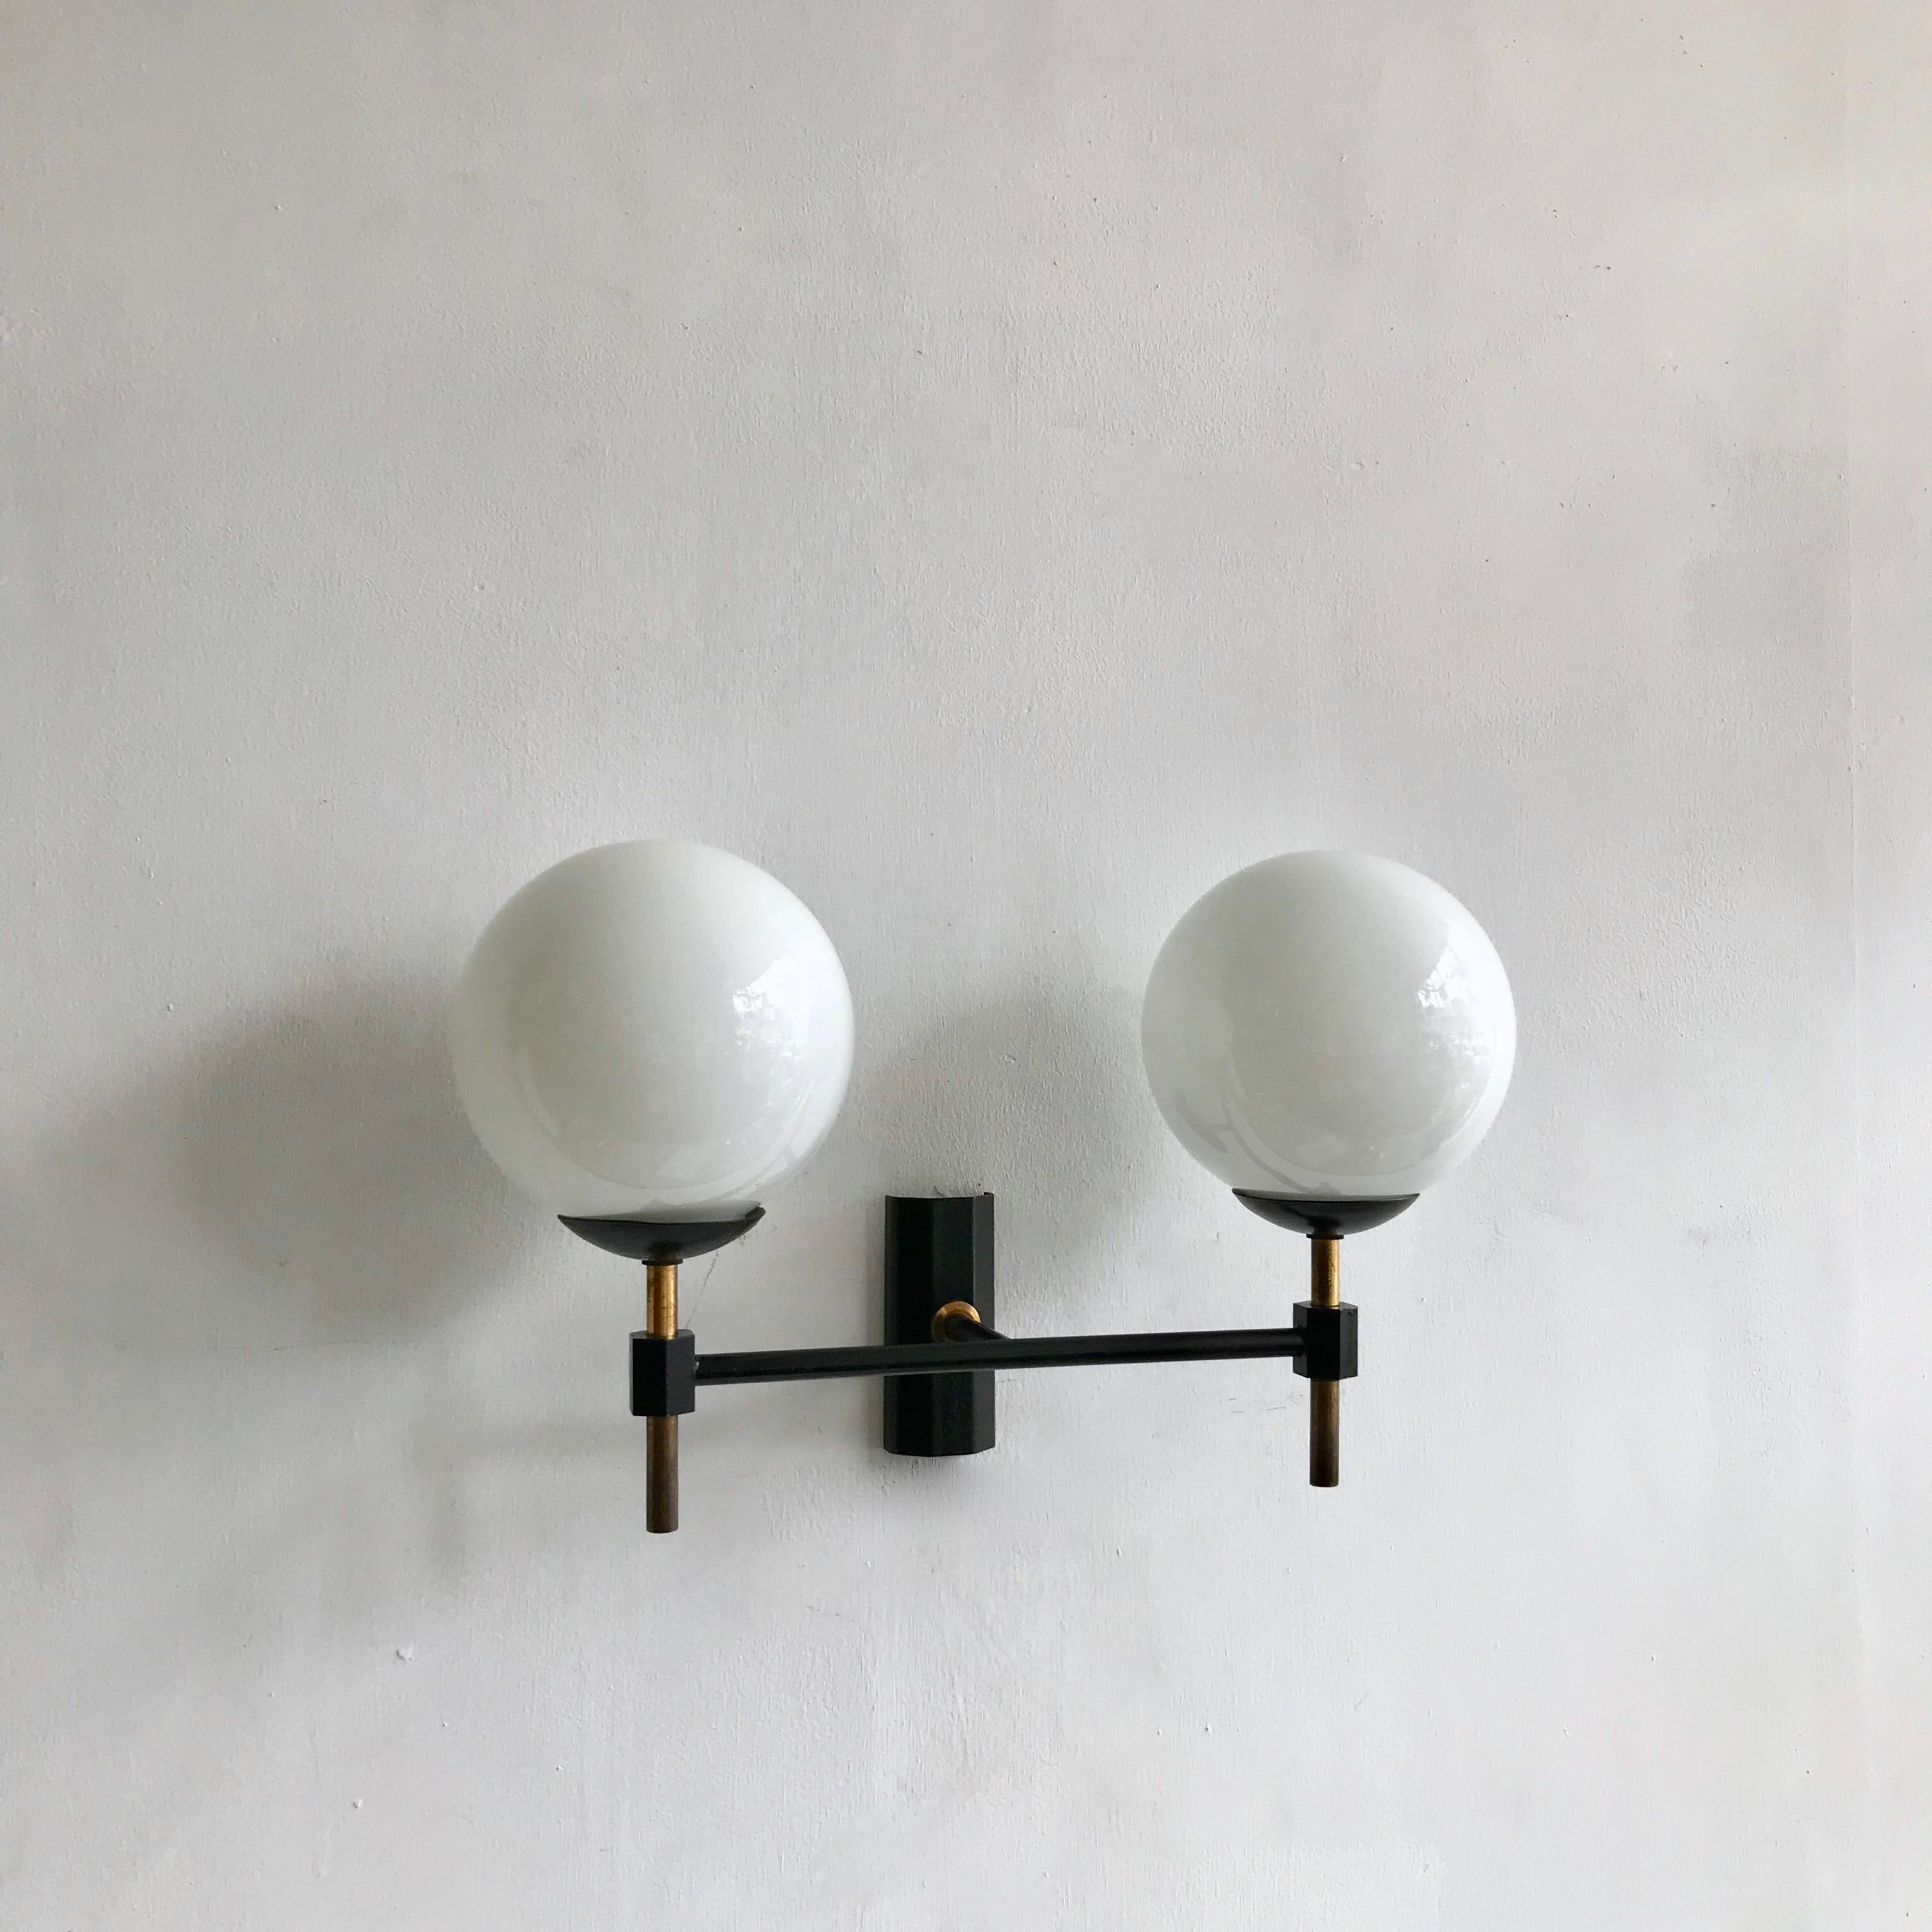 Stylish midcentury opaline wall light made from brass with original black paint finish. The wall light has great proportions. With two thick polished glass opaline globe shades. The wall light takes two B15 lamps.

The wall light has been fully